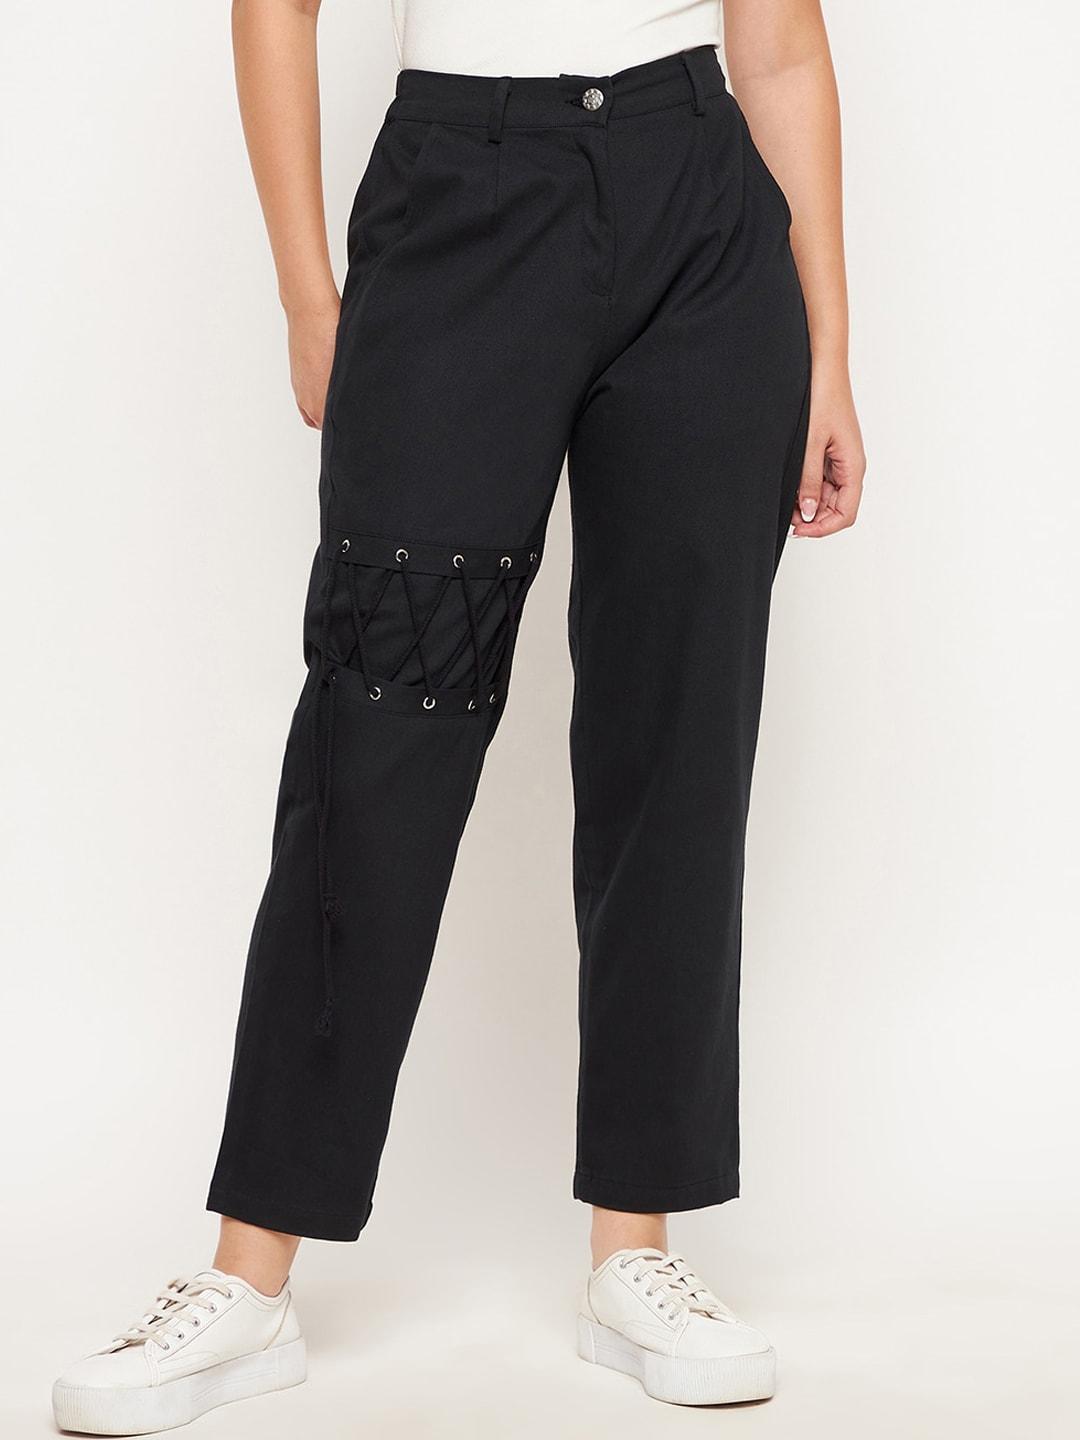 WineRed Women Black High-Rise Easy Wash Cargos Trousers